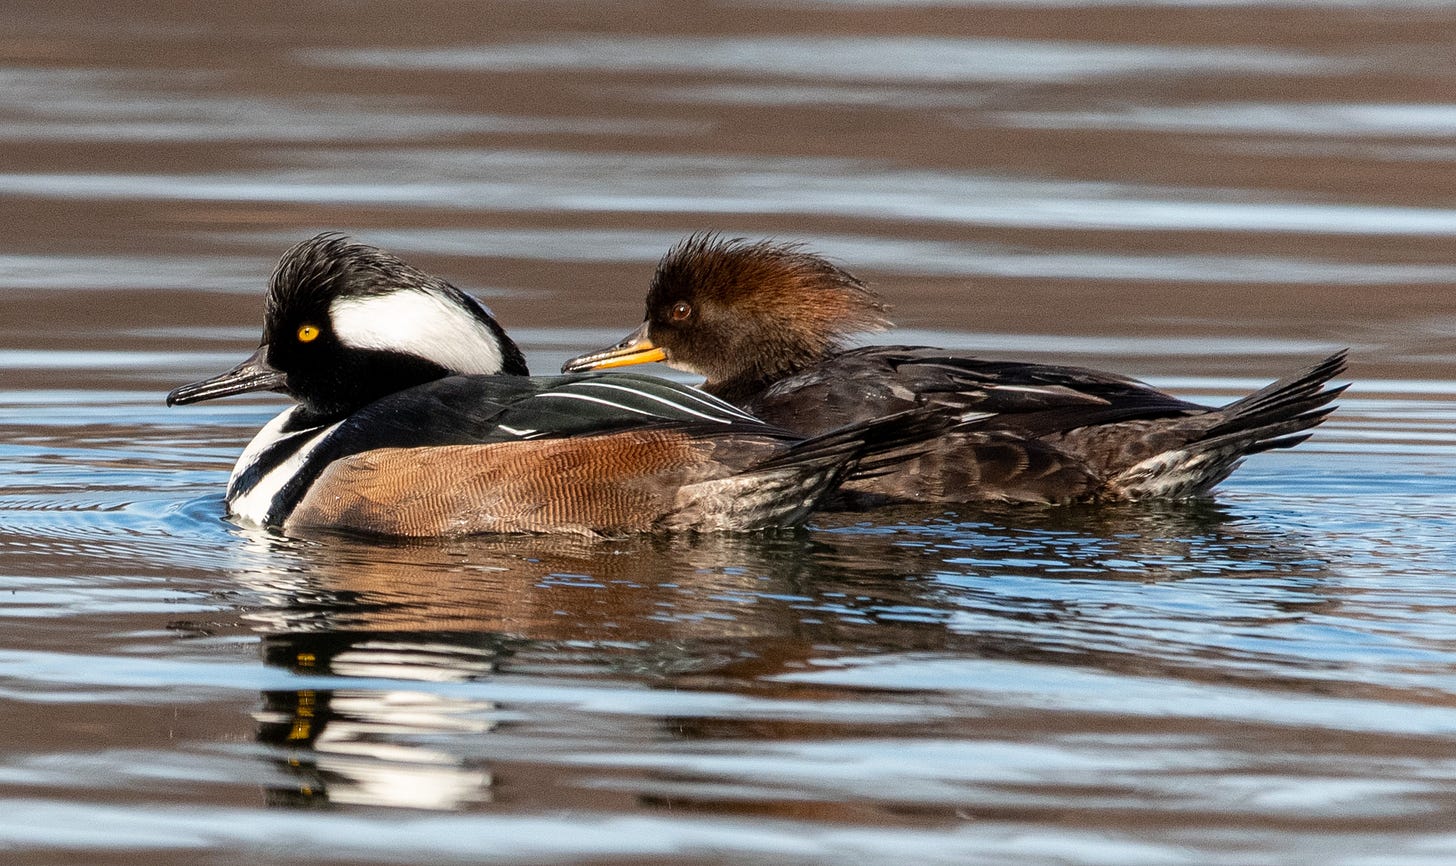 A pair of ducks, the male with a tall black crest with a white inset, the female with a frizzy reddish-brown crest